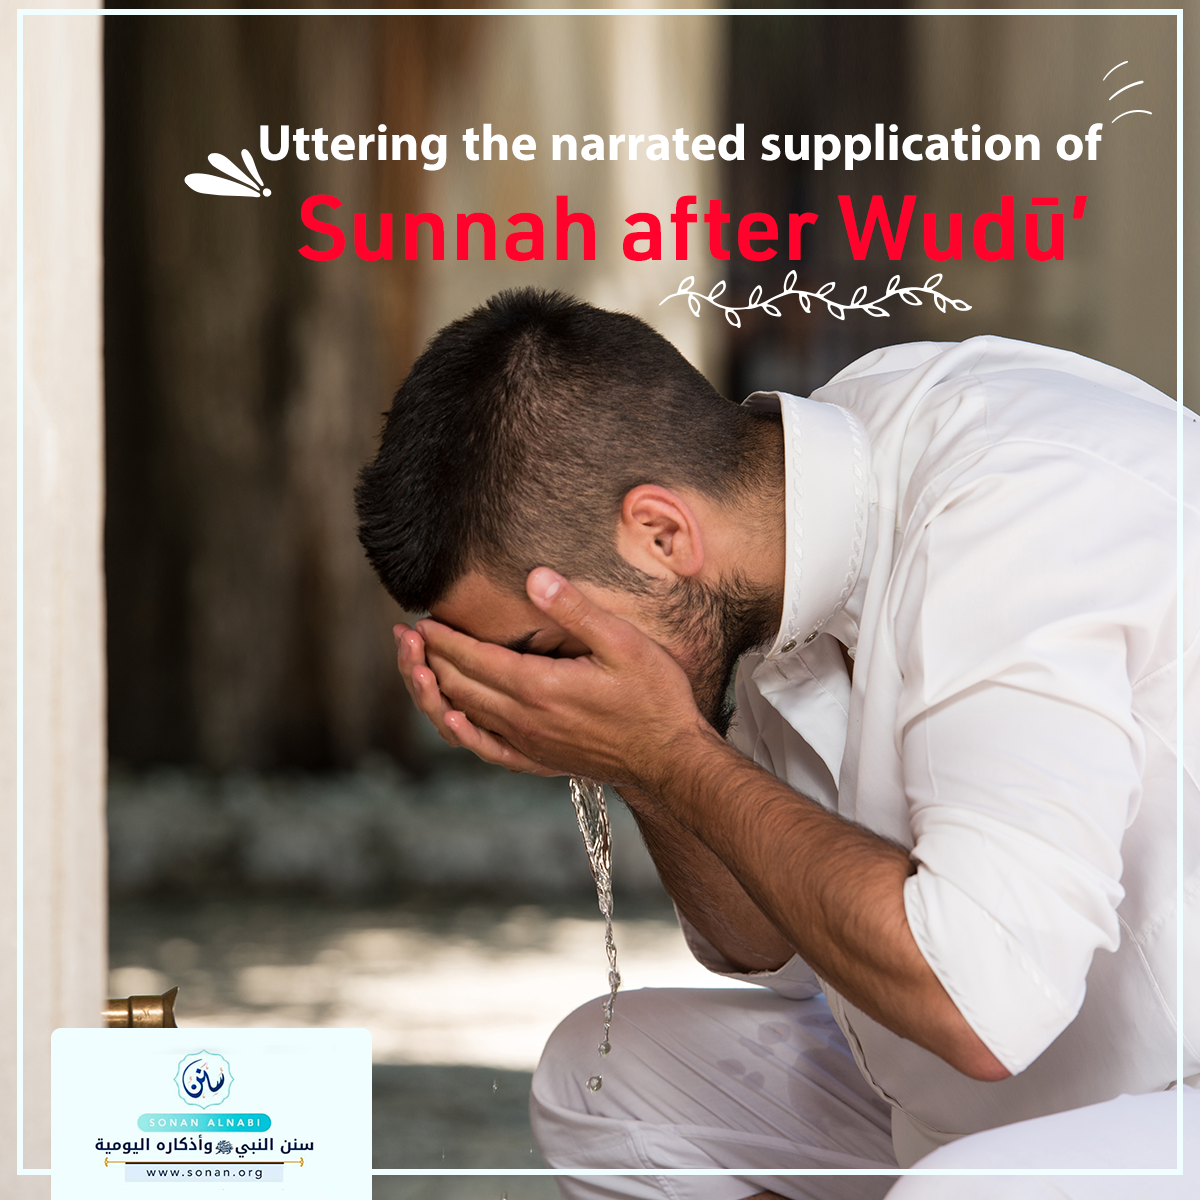 Uttering the narrated supplication of Sunnah after Wudū’